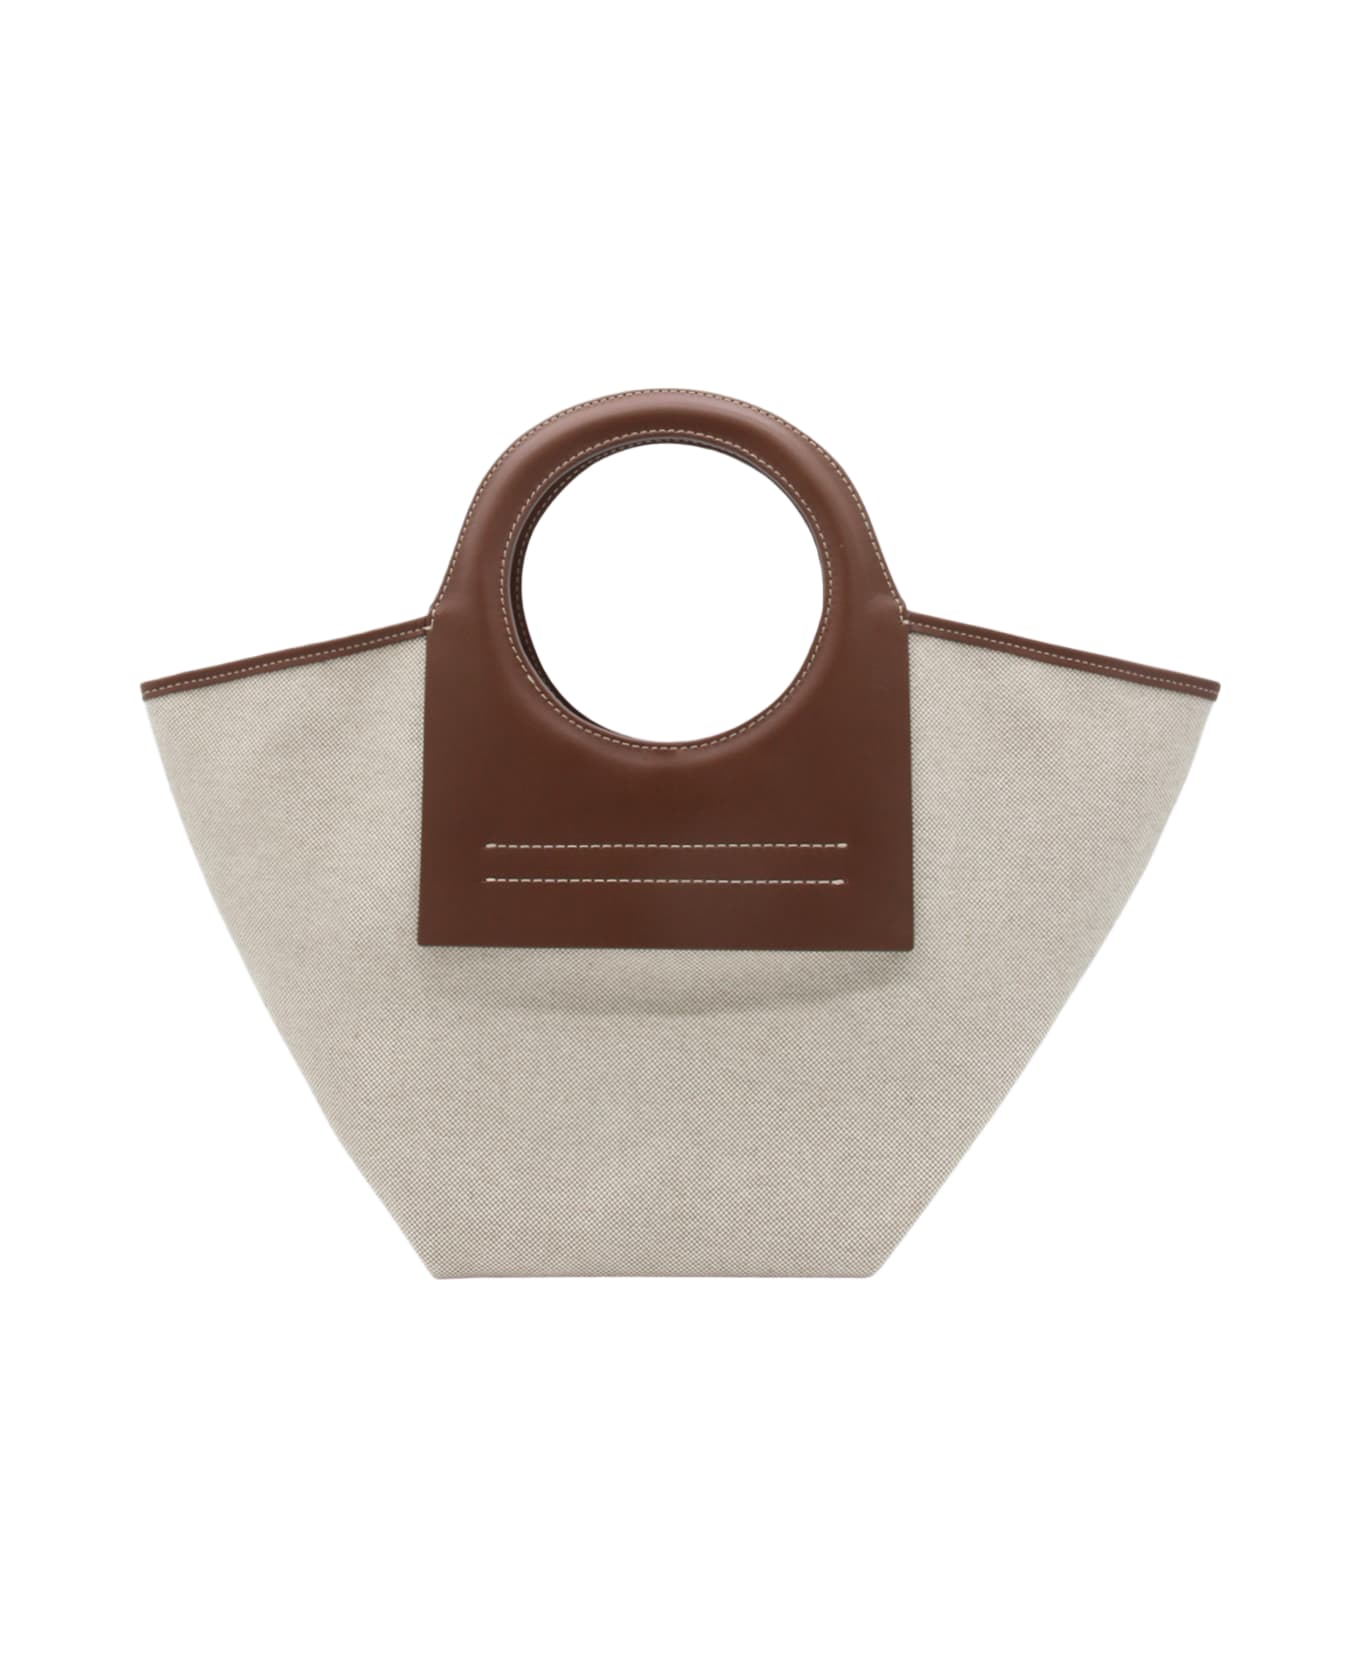 Hereu Beige And Brown Chestnut Leather And Canvas Cala Tote Bag - BEIGE/CHESTNUT